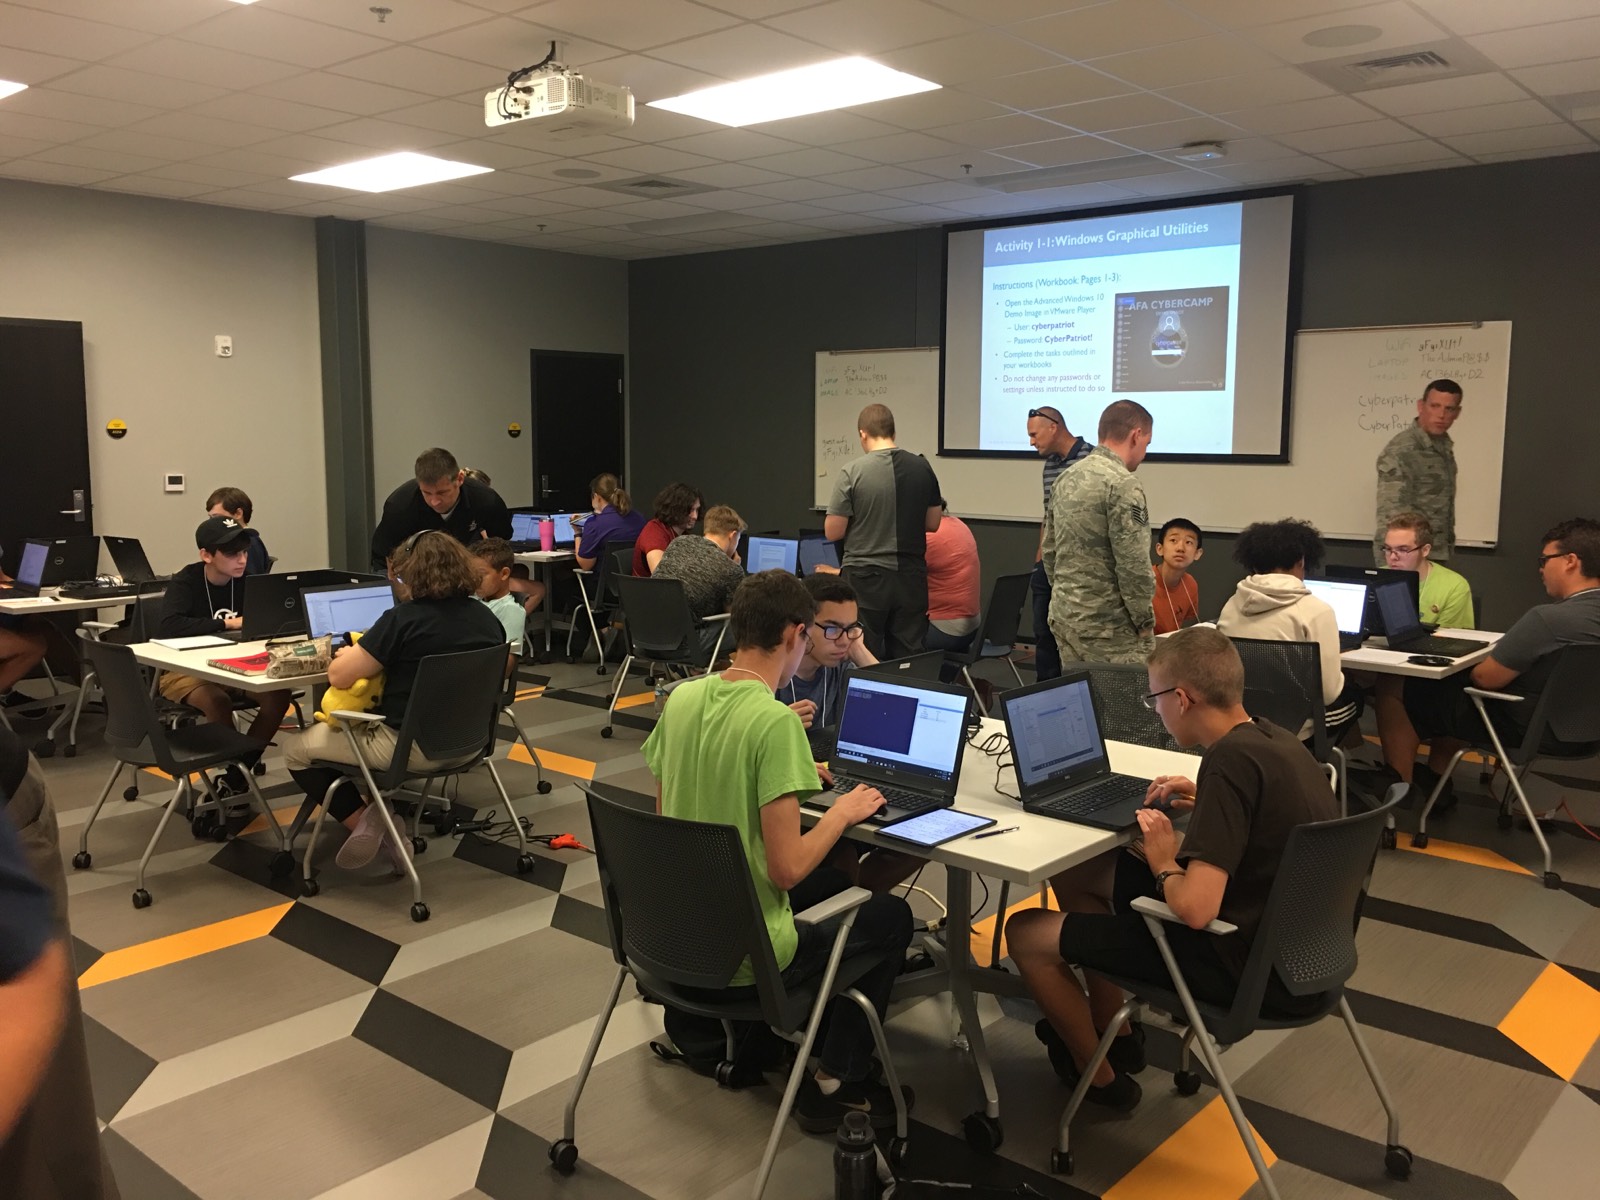 Engineering students solving cybersecurity challanges during a boot camp.